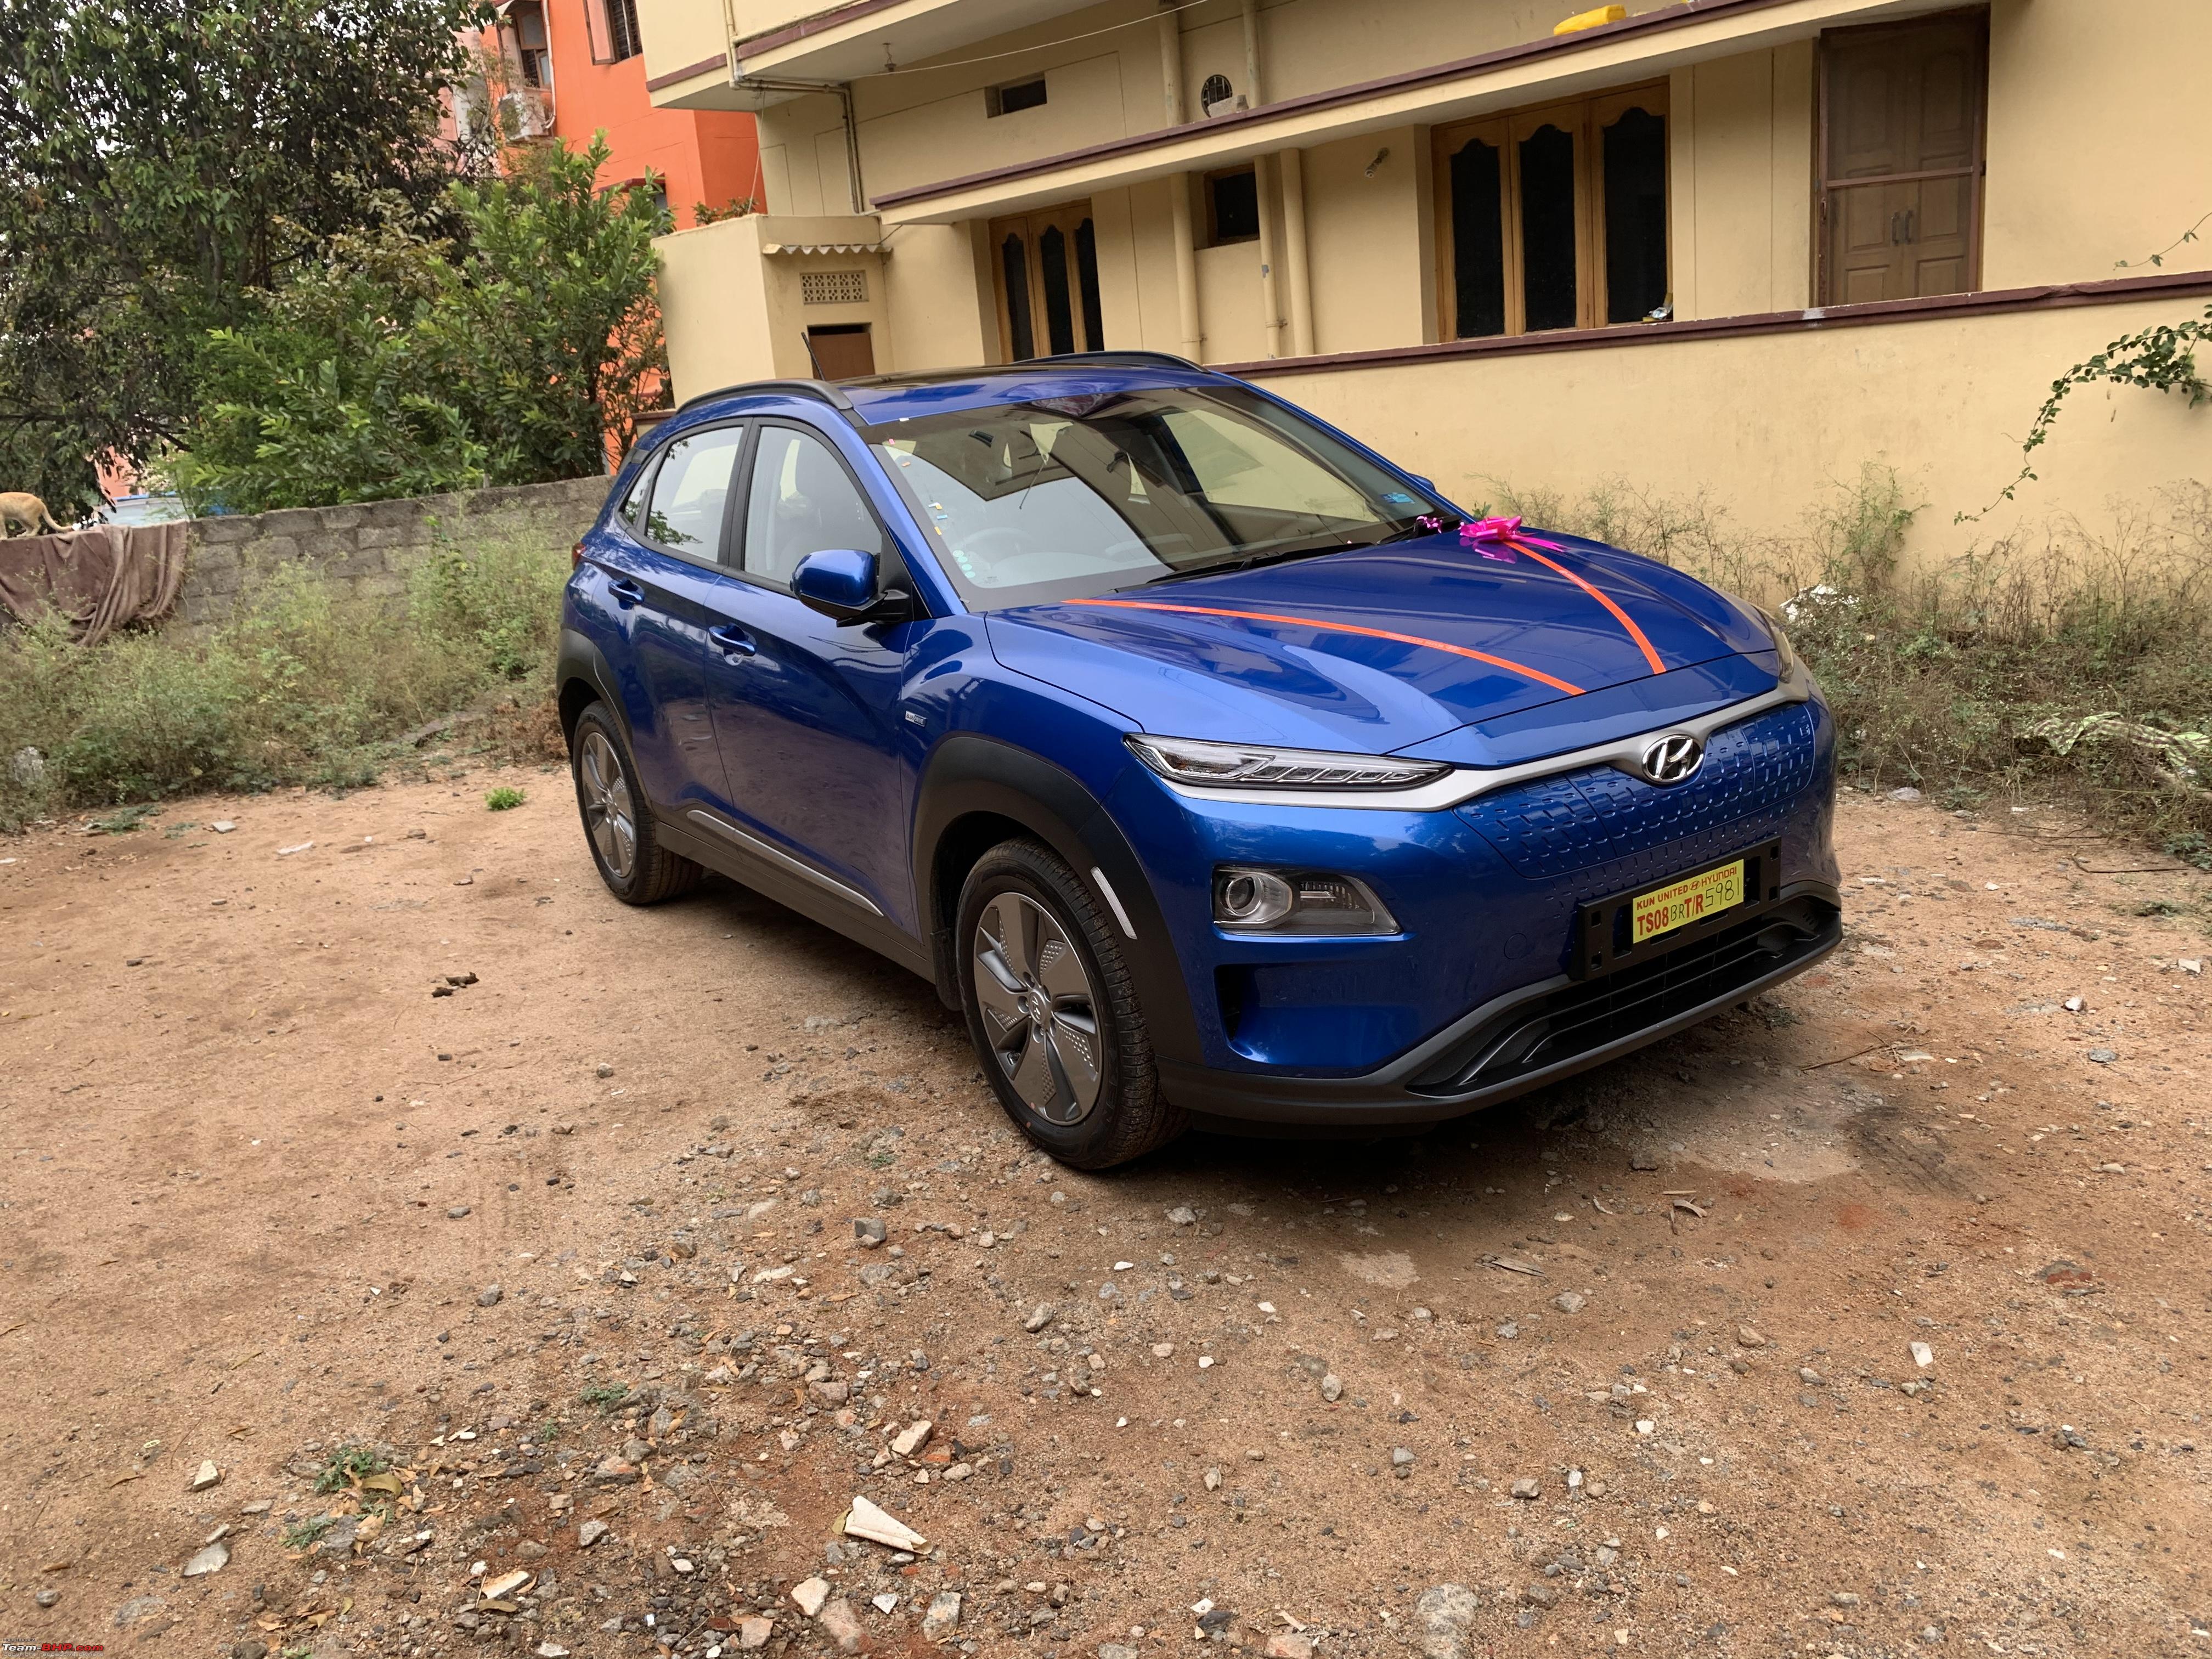 Hyundai Kona Electric An Excellent Car Whose Reputation Has Suffered at the  Hands of…Hyundai, by Tomwalker, ILLUMINATION'S MIRROR